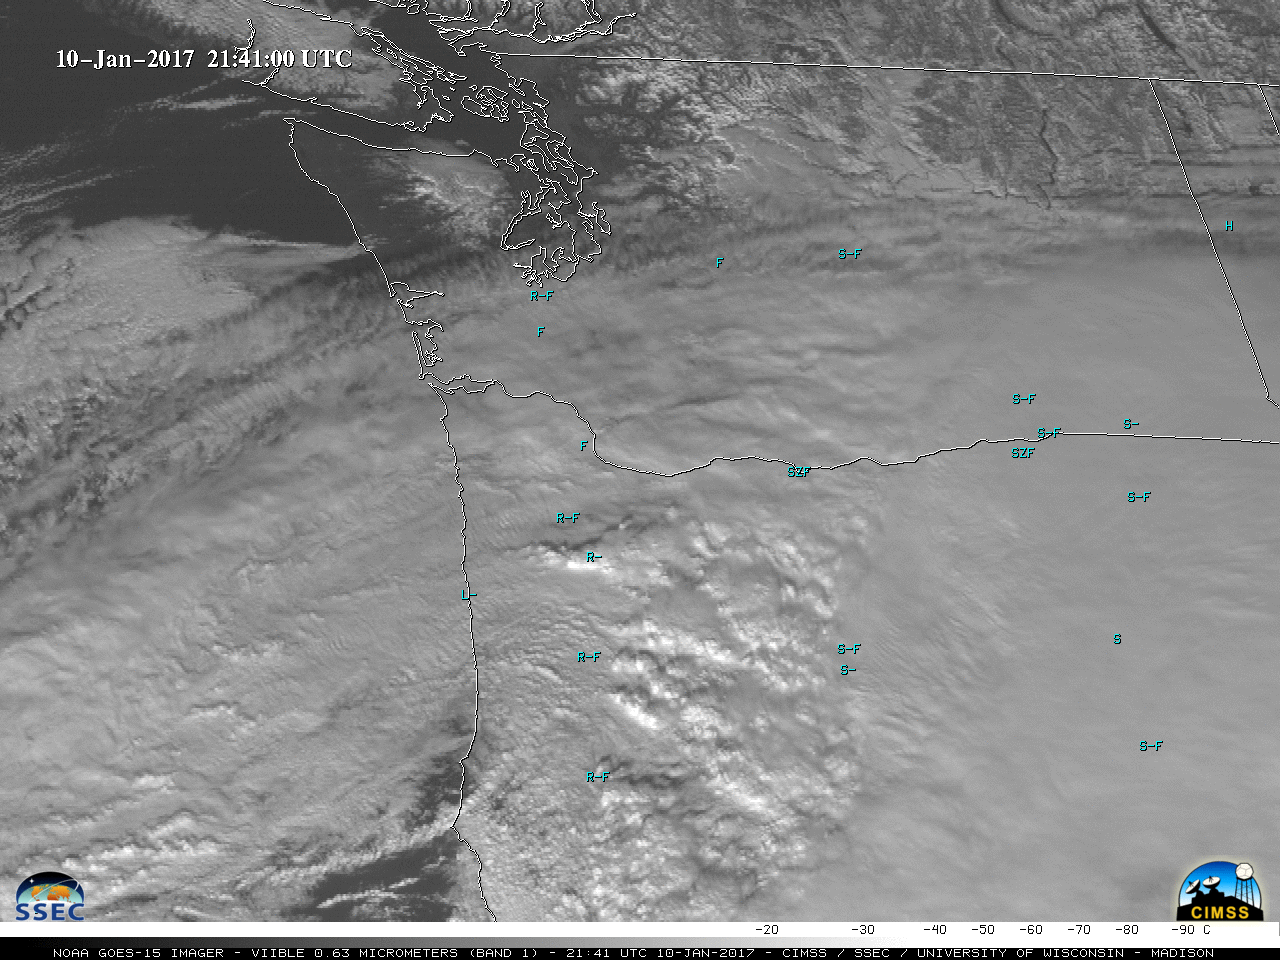 GOES-15 Visible (0.63 µm) images, with hourly reports of surface weather type [click to play animation] 